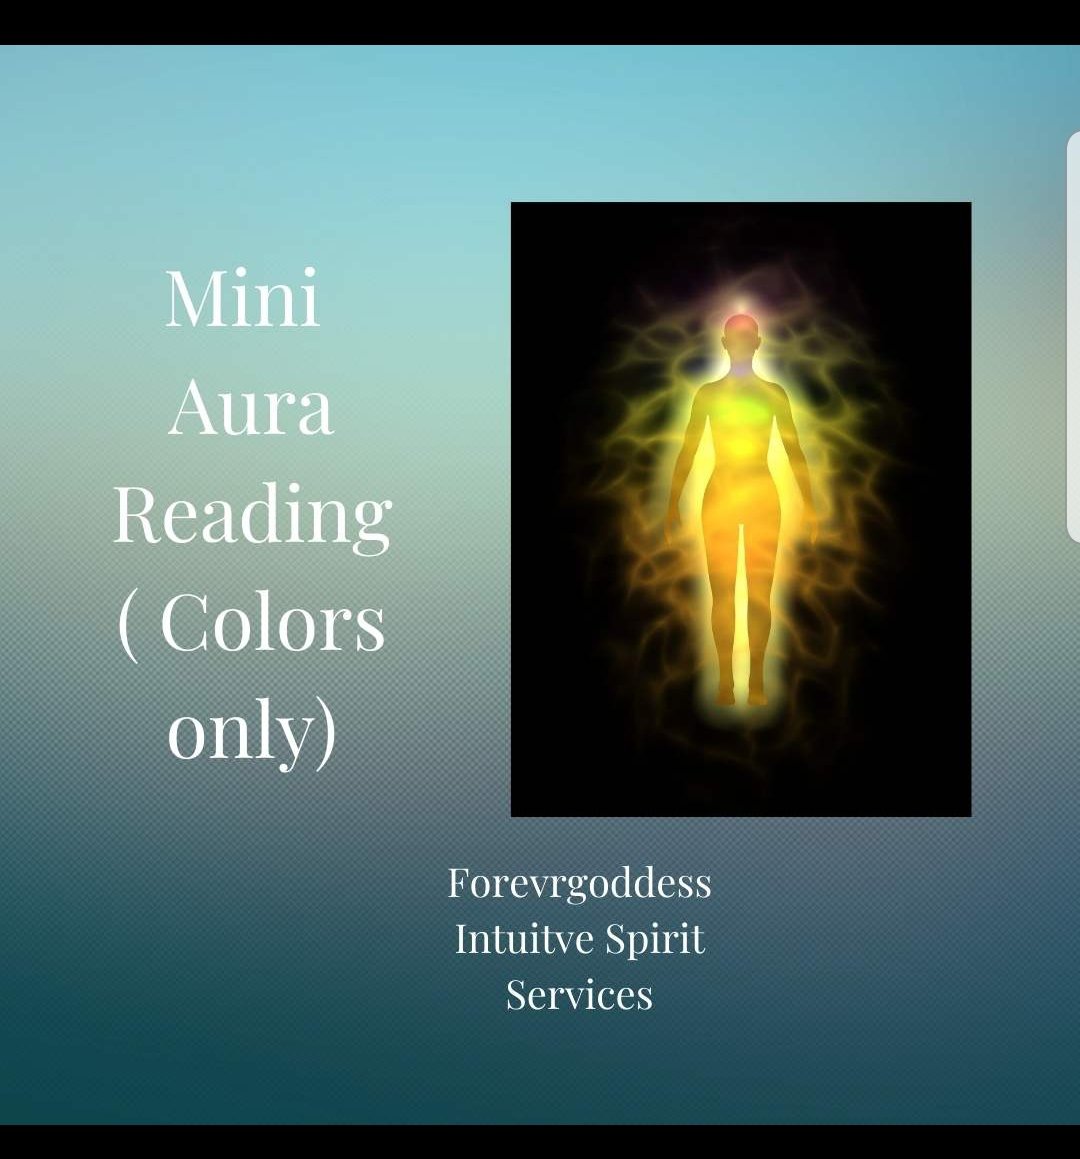 Mini aura reading (colors only)